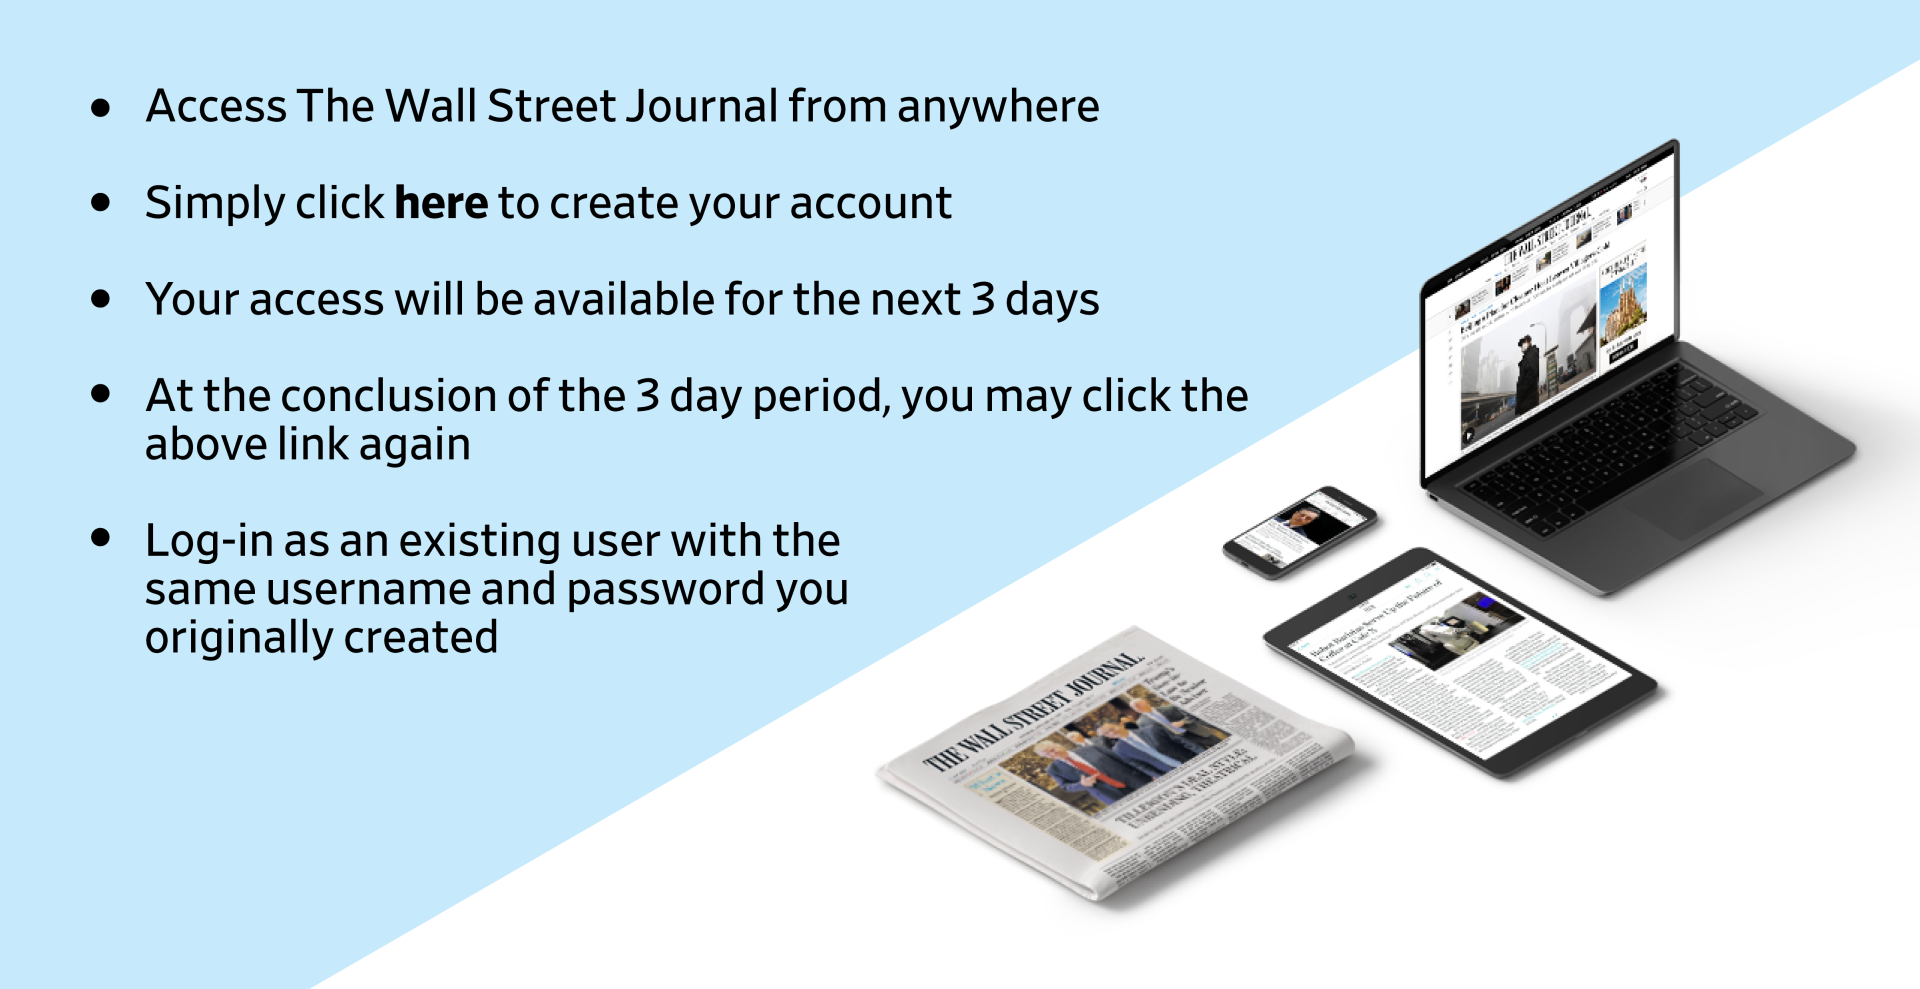 instructions to use WSJ online